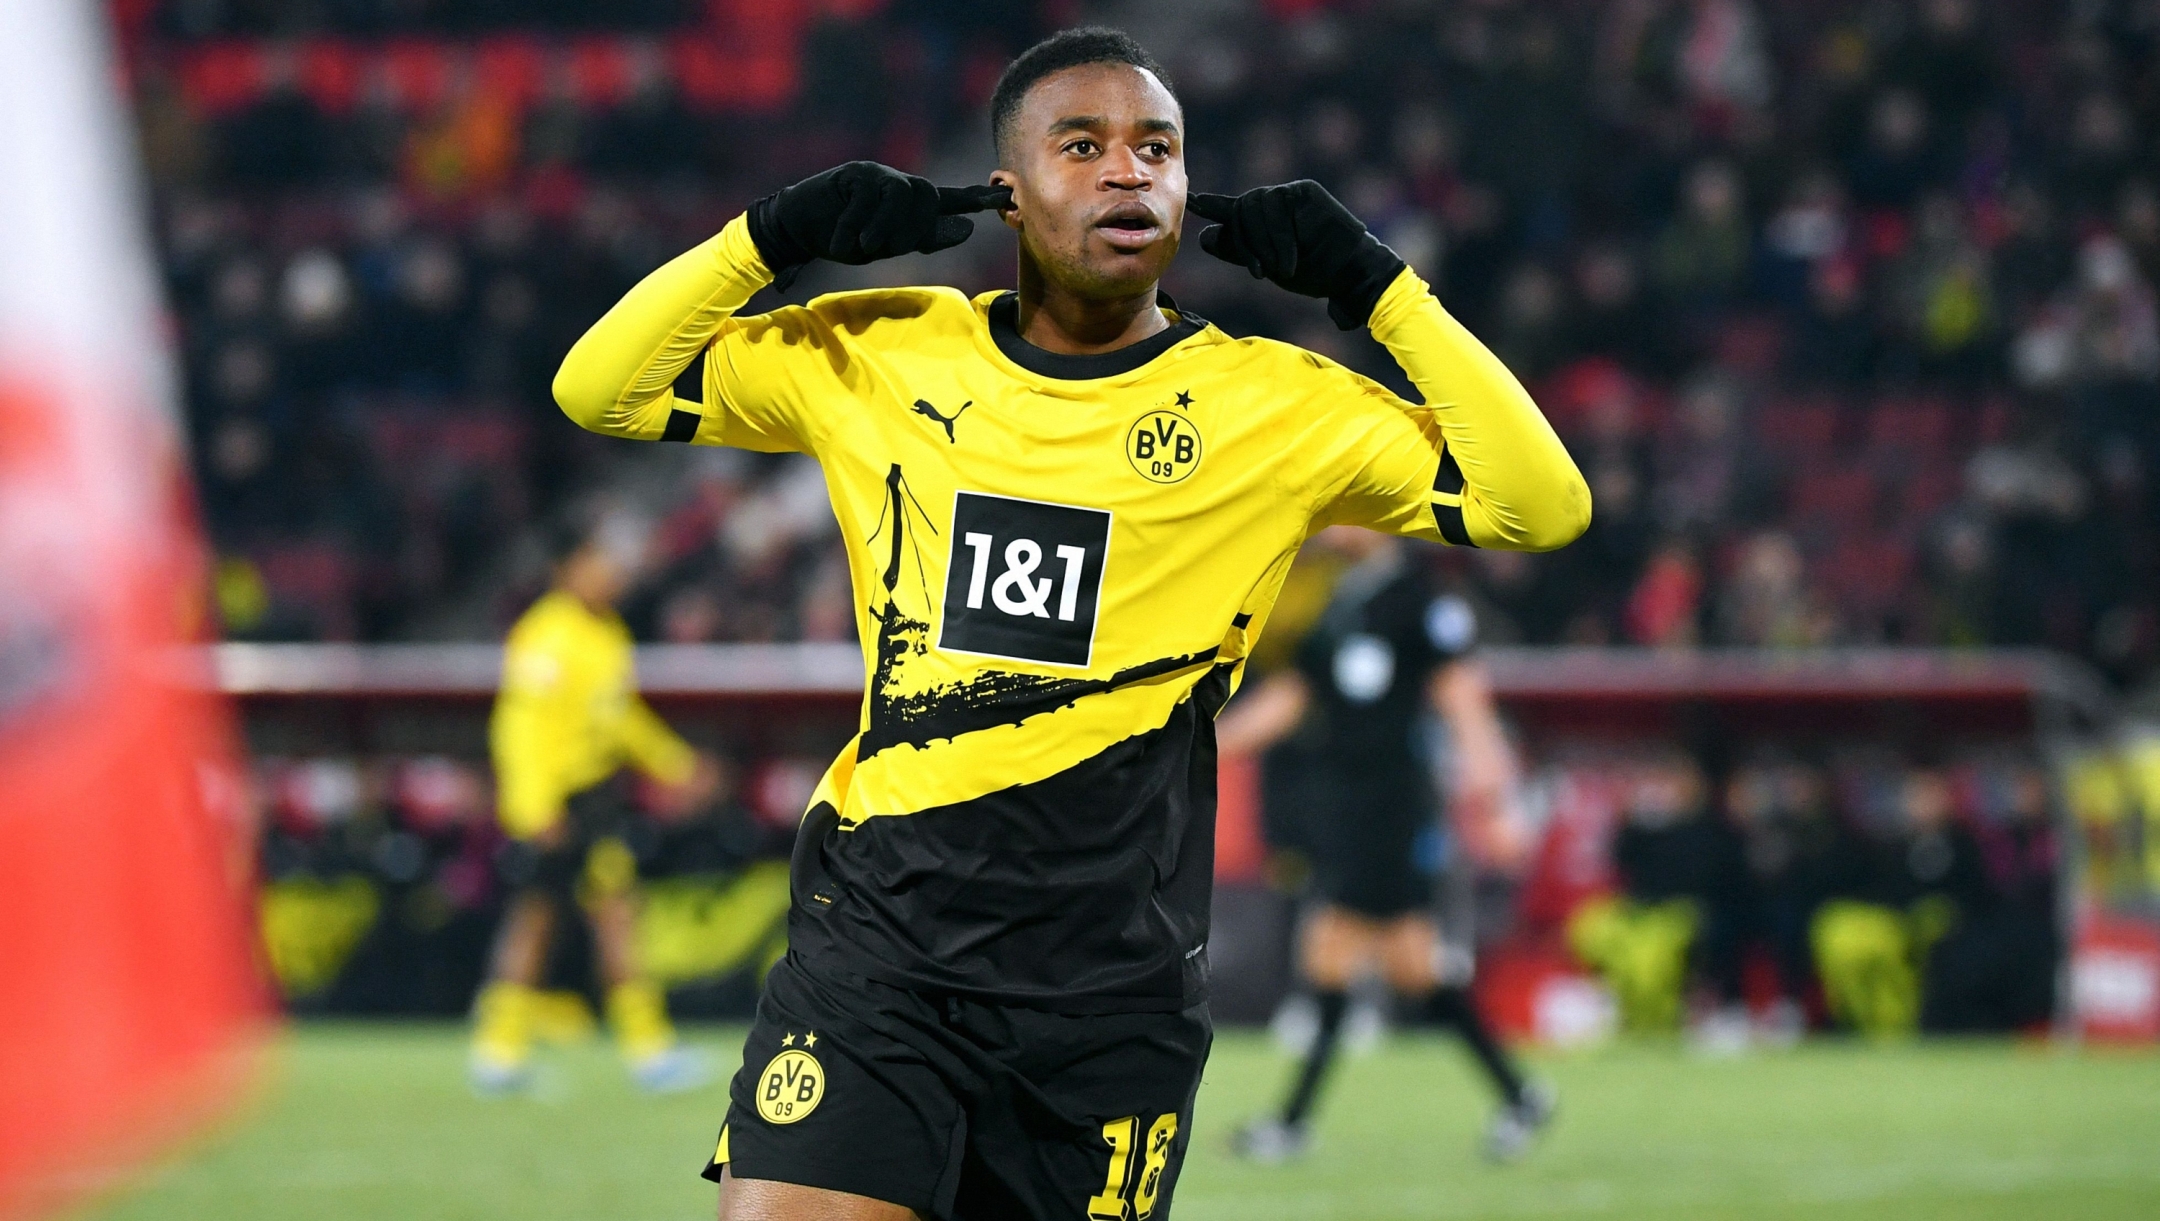 Dortmund's German forward #18 Youssoufa Moukoko celebrates his 0-4 during the German first division Bundesliga football match between FC Cologne and Borussia Dortmund in Cologne on January 20, 2024. (Photo by Uwe KRAFT / AFP) / DFL REGULATIONS PROHIBIT ANY USE OF PHOTOGRAPHS AS IMAGE SEQUENCES AND/OR QUASI-VIDEO